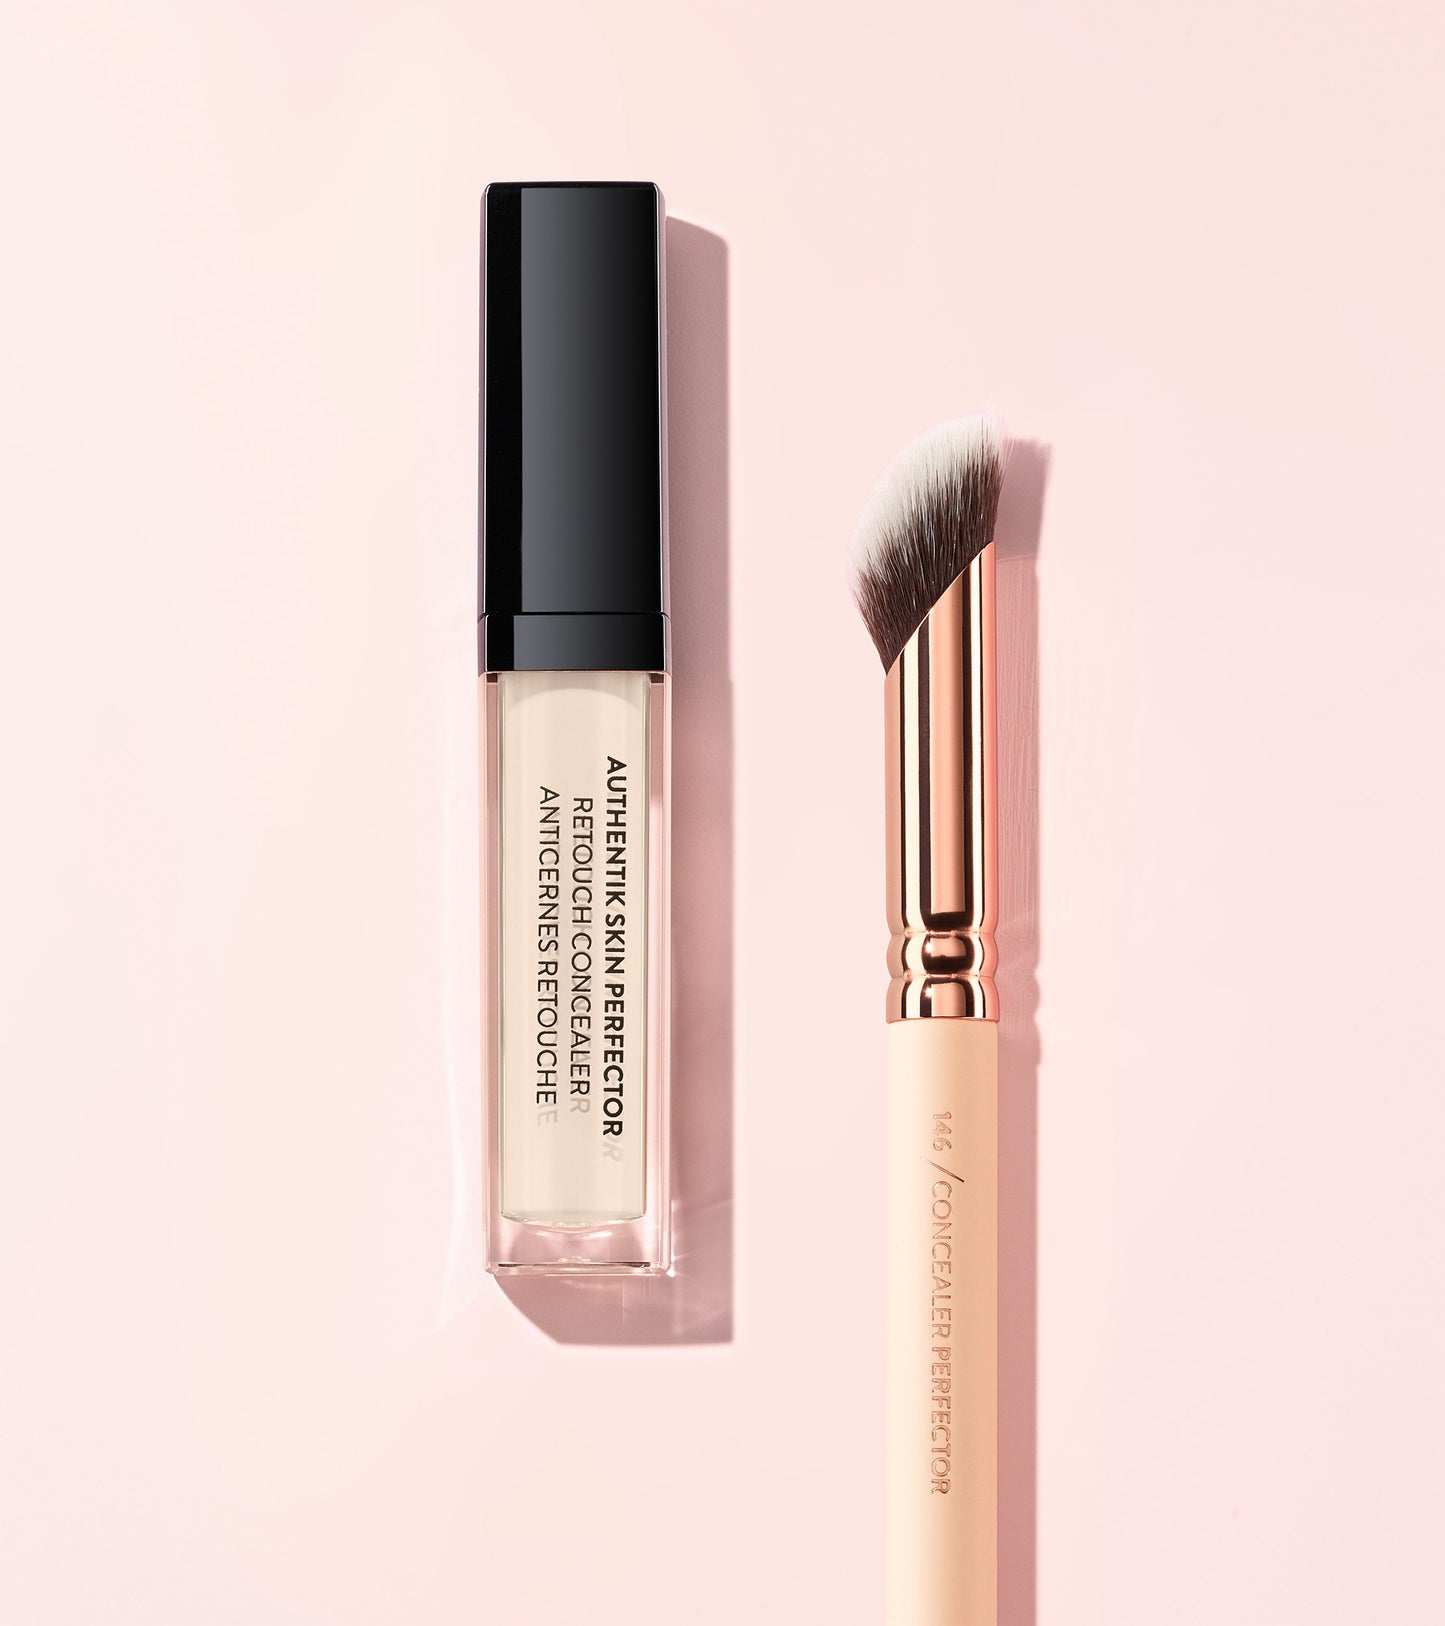 AUTHENTIK SKIN PERFECTOR CONCEALER (020 ACCURATE) Expanded Image 3